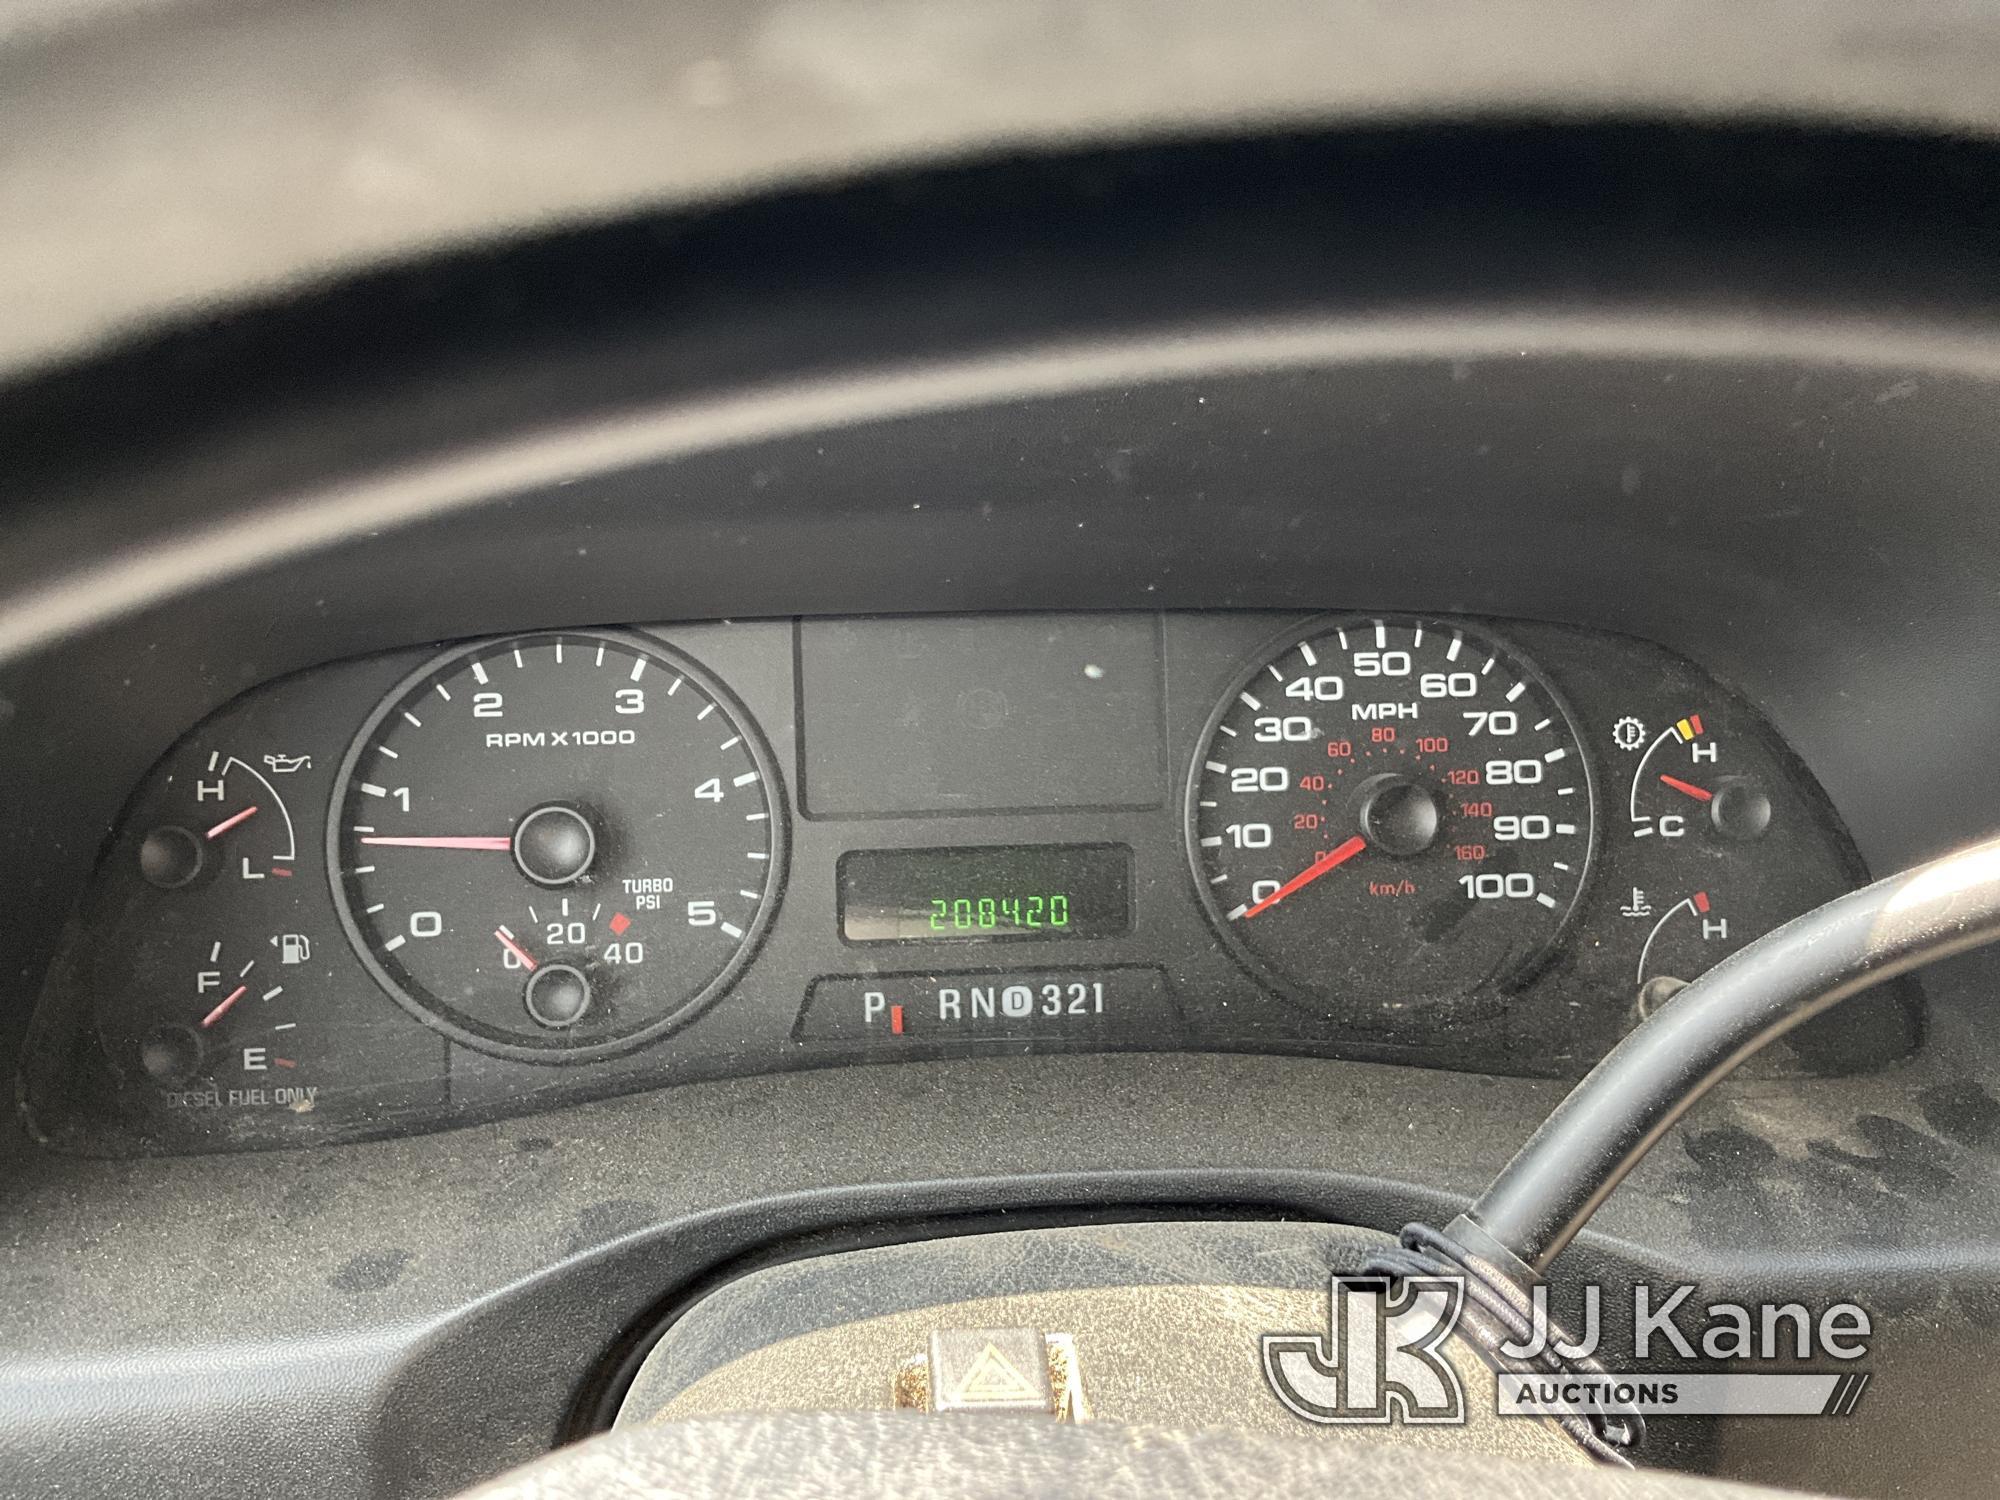 (San Antonio, TX) 2006 Ford F250 4x4 Extended-Cab Pickup Truck Runs & Moves) (Jump To Start